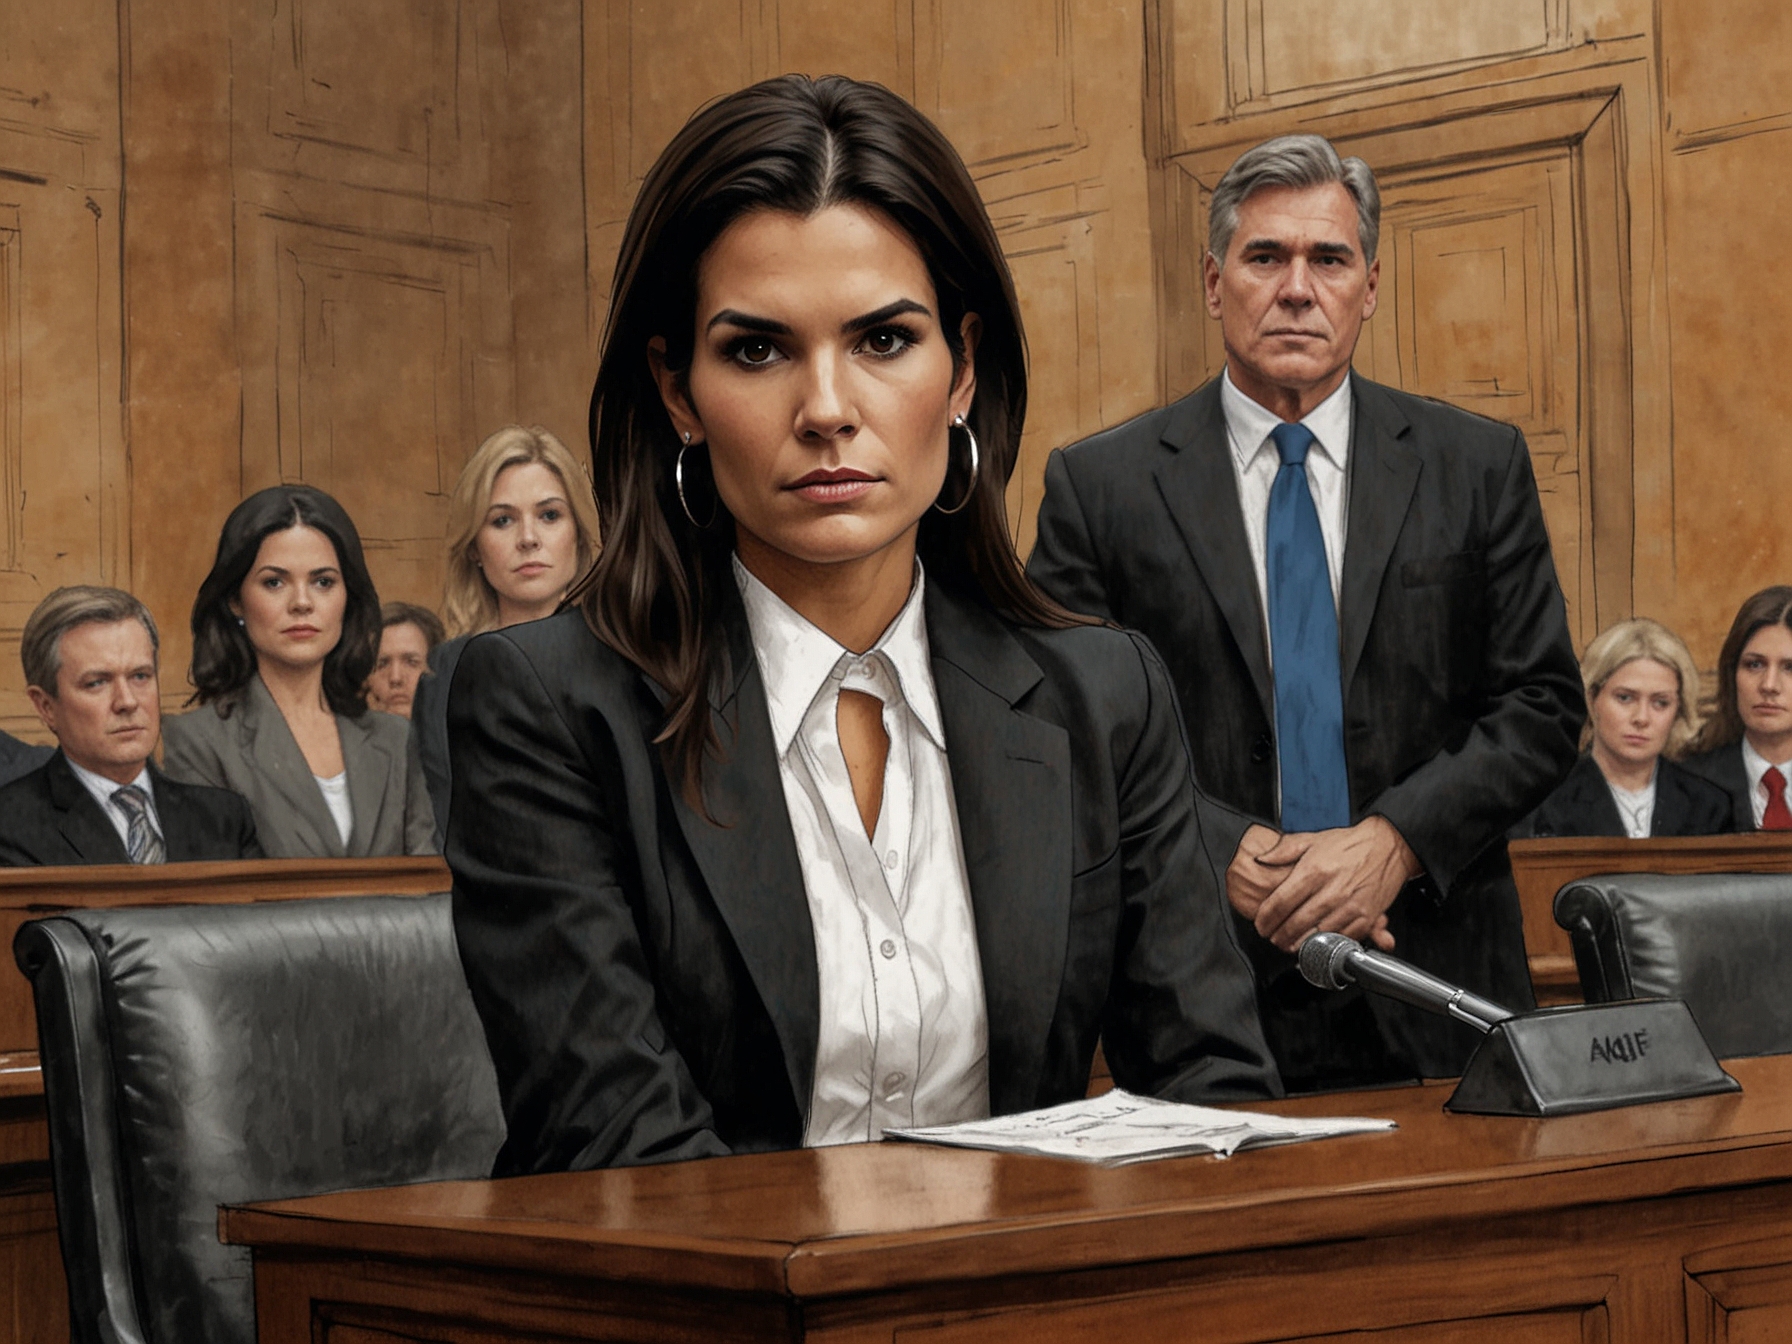 A courtroom sketch showing Angie Harmon's daughter facing a judge. The illustration captures the tension and seriousness of her legal predicament, with media representatives in the background.